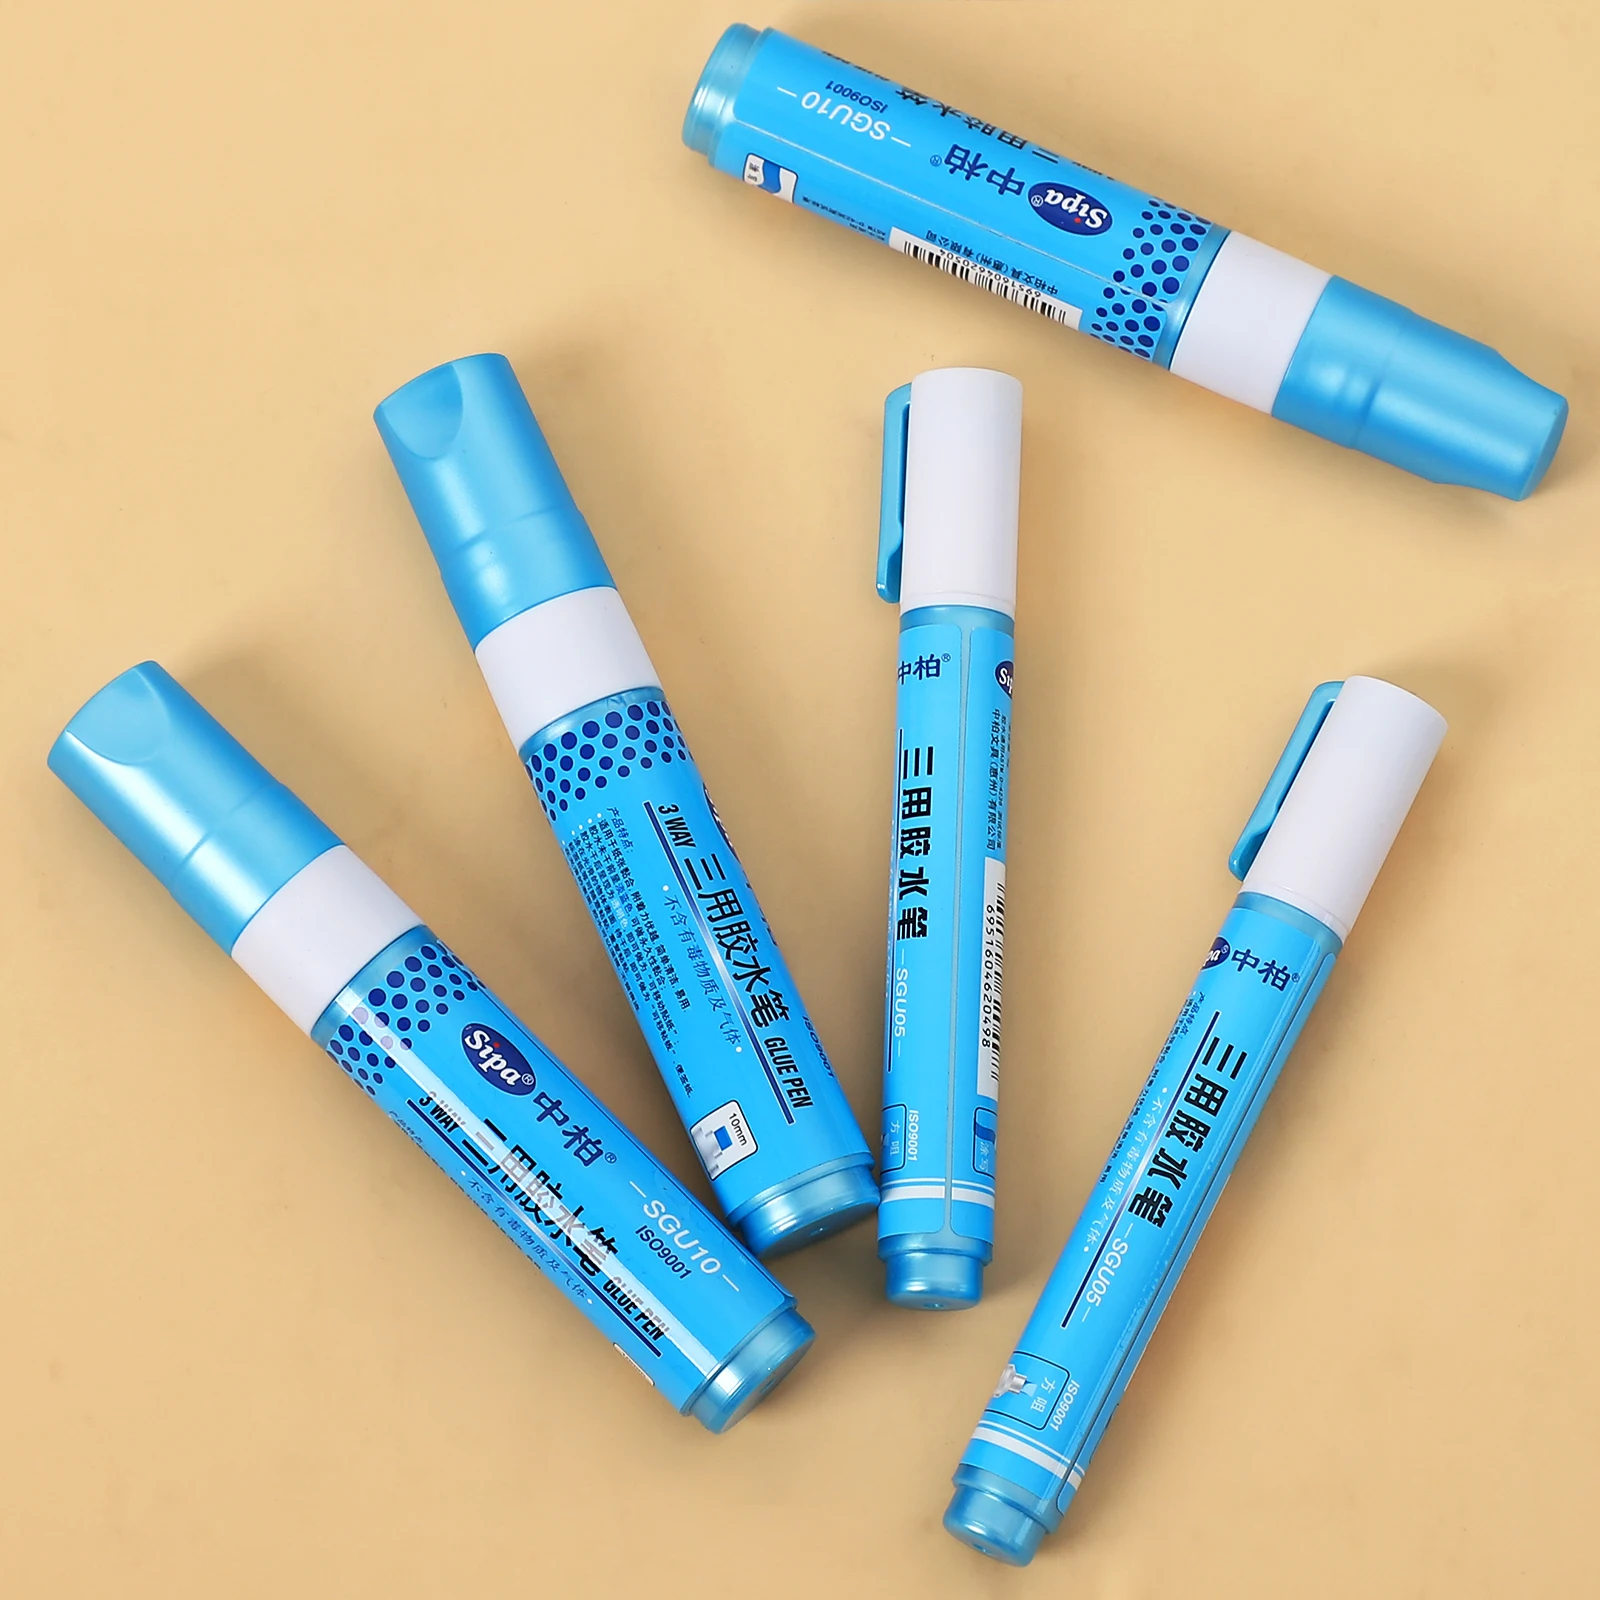 Washable Quickie Glue Pen Home & Office Paper Etc.Good for School All Purpose School Glue Stick,Used on Photos 8 Pack 1 Blue Pen+1 Gray Pen+6 Refills LITPRIN School Glue Sticks Office Glue Pen 